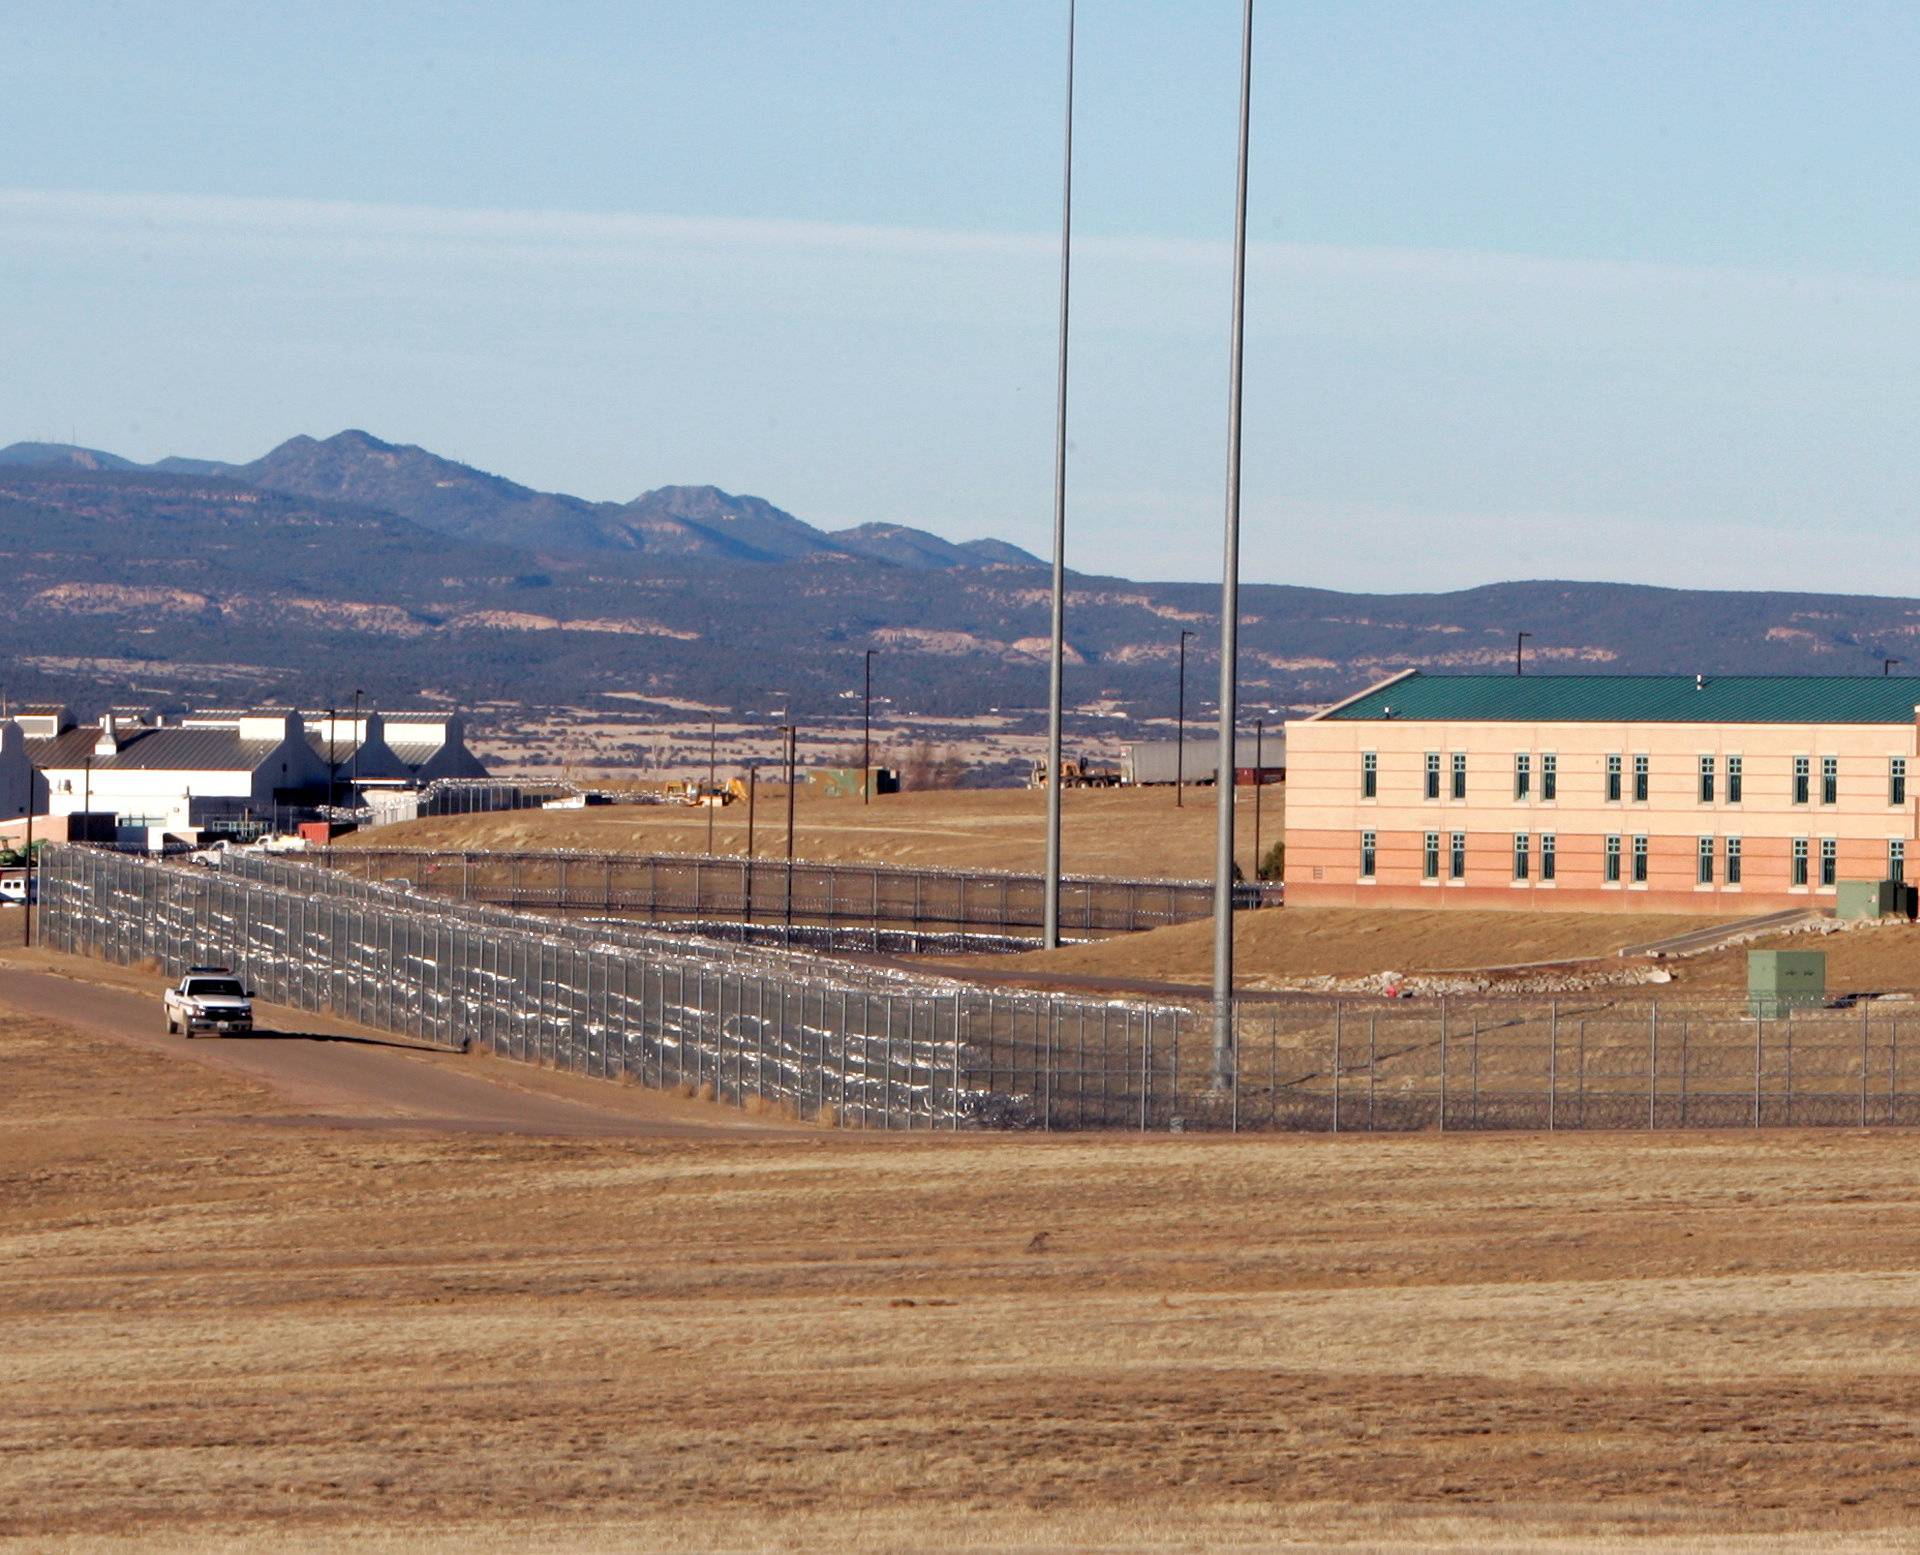 FILE PHOTO: Patrol vehicle is seen along the fencing at the Federal Correctional Complex, including the Administrative Maximum Penitentiary or "Supermax" prison, in Florence, Colorado